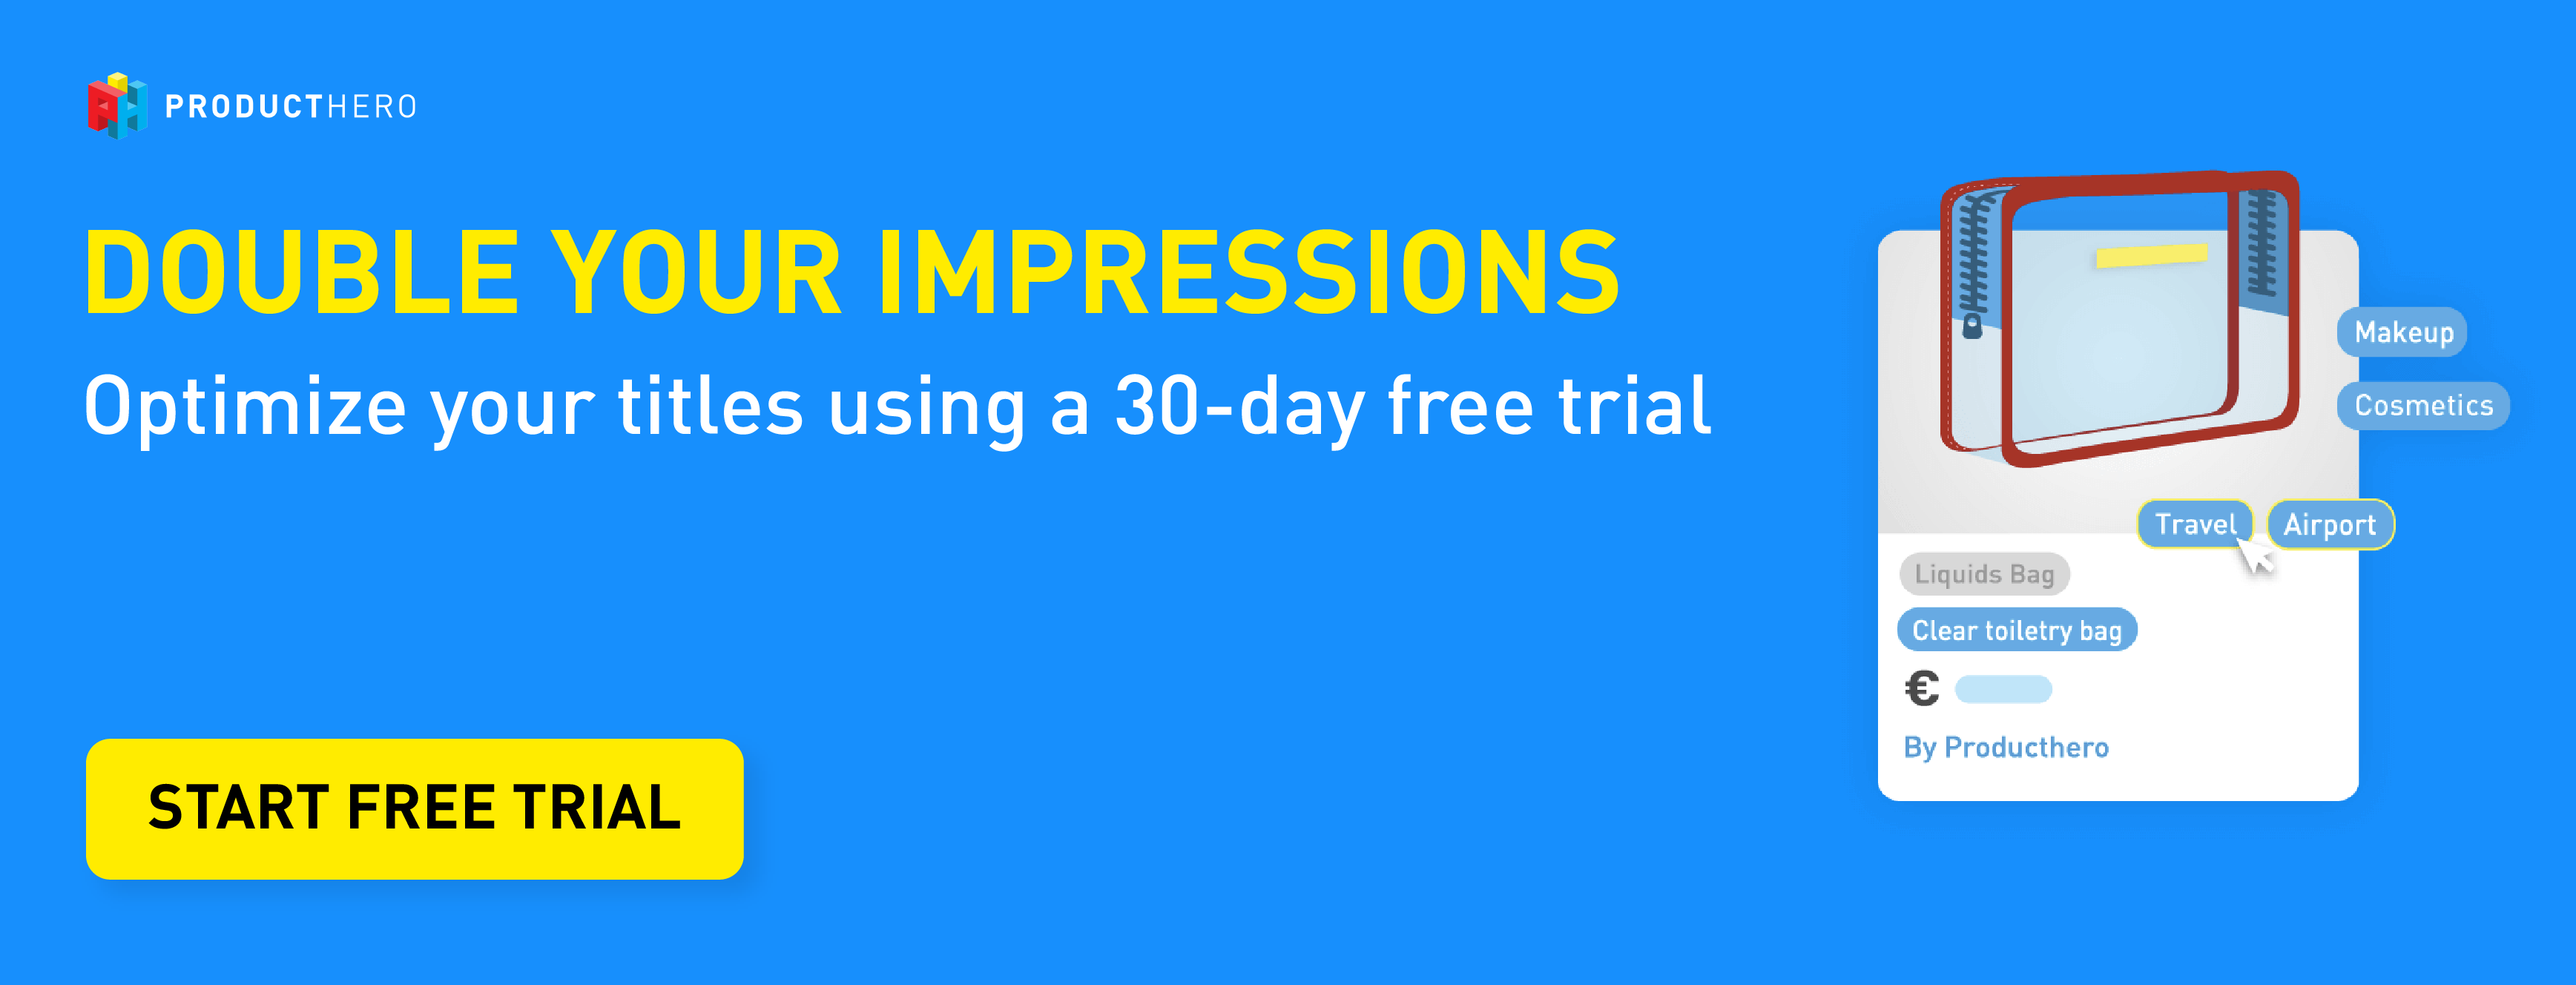 Double your impressions. 30-day free trial